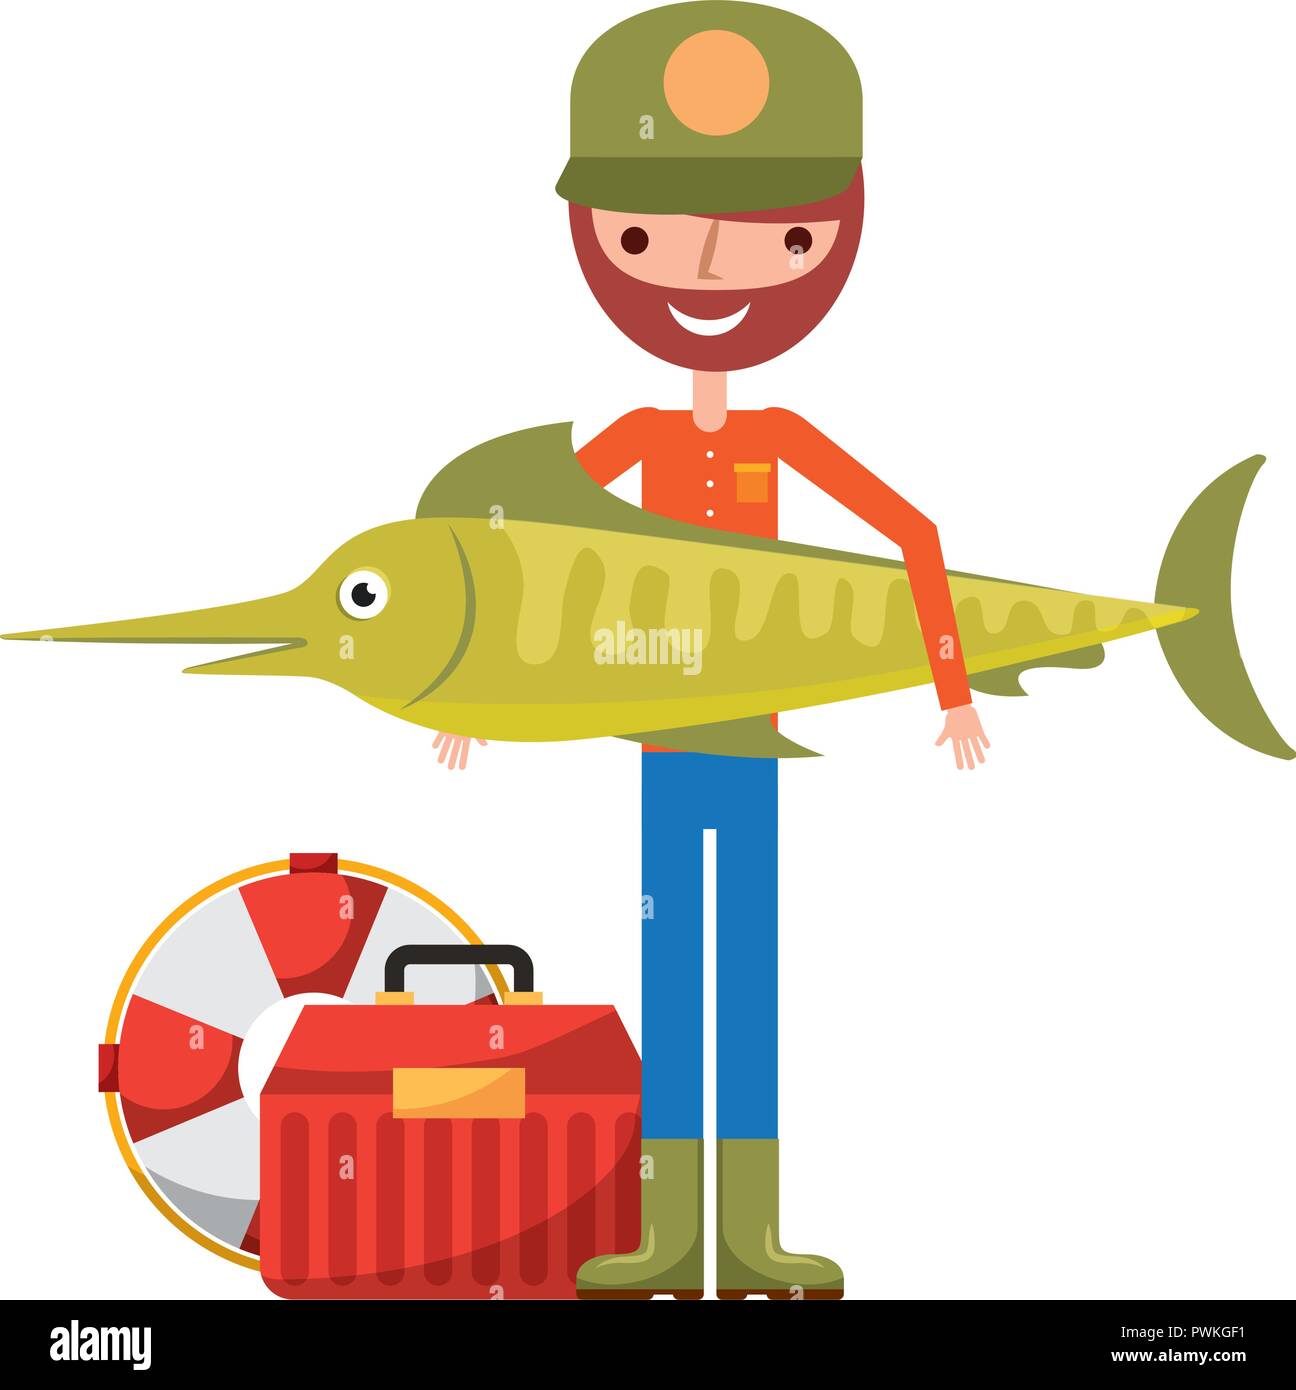 Tackle box icon hi-res stock photography and images - Alamy